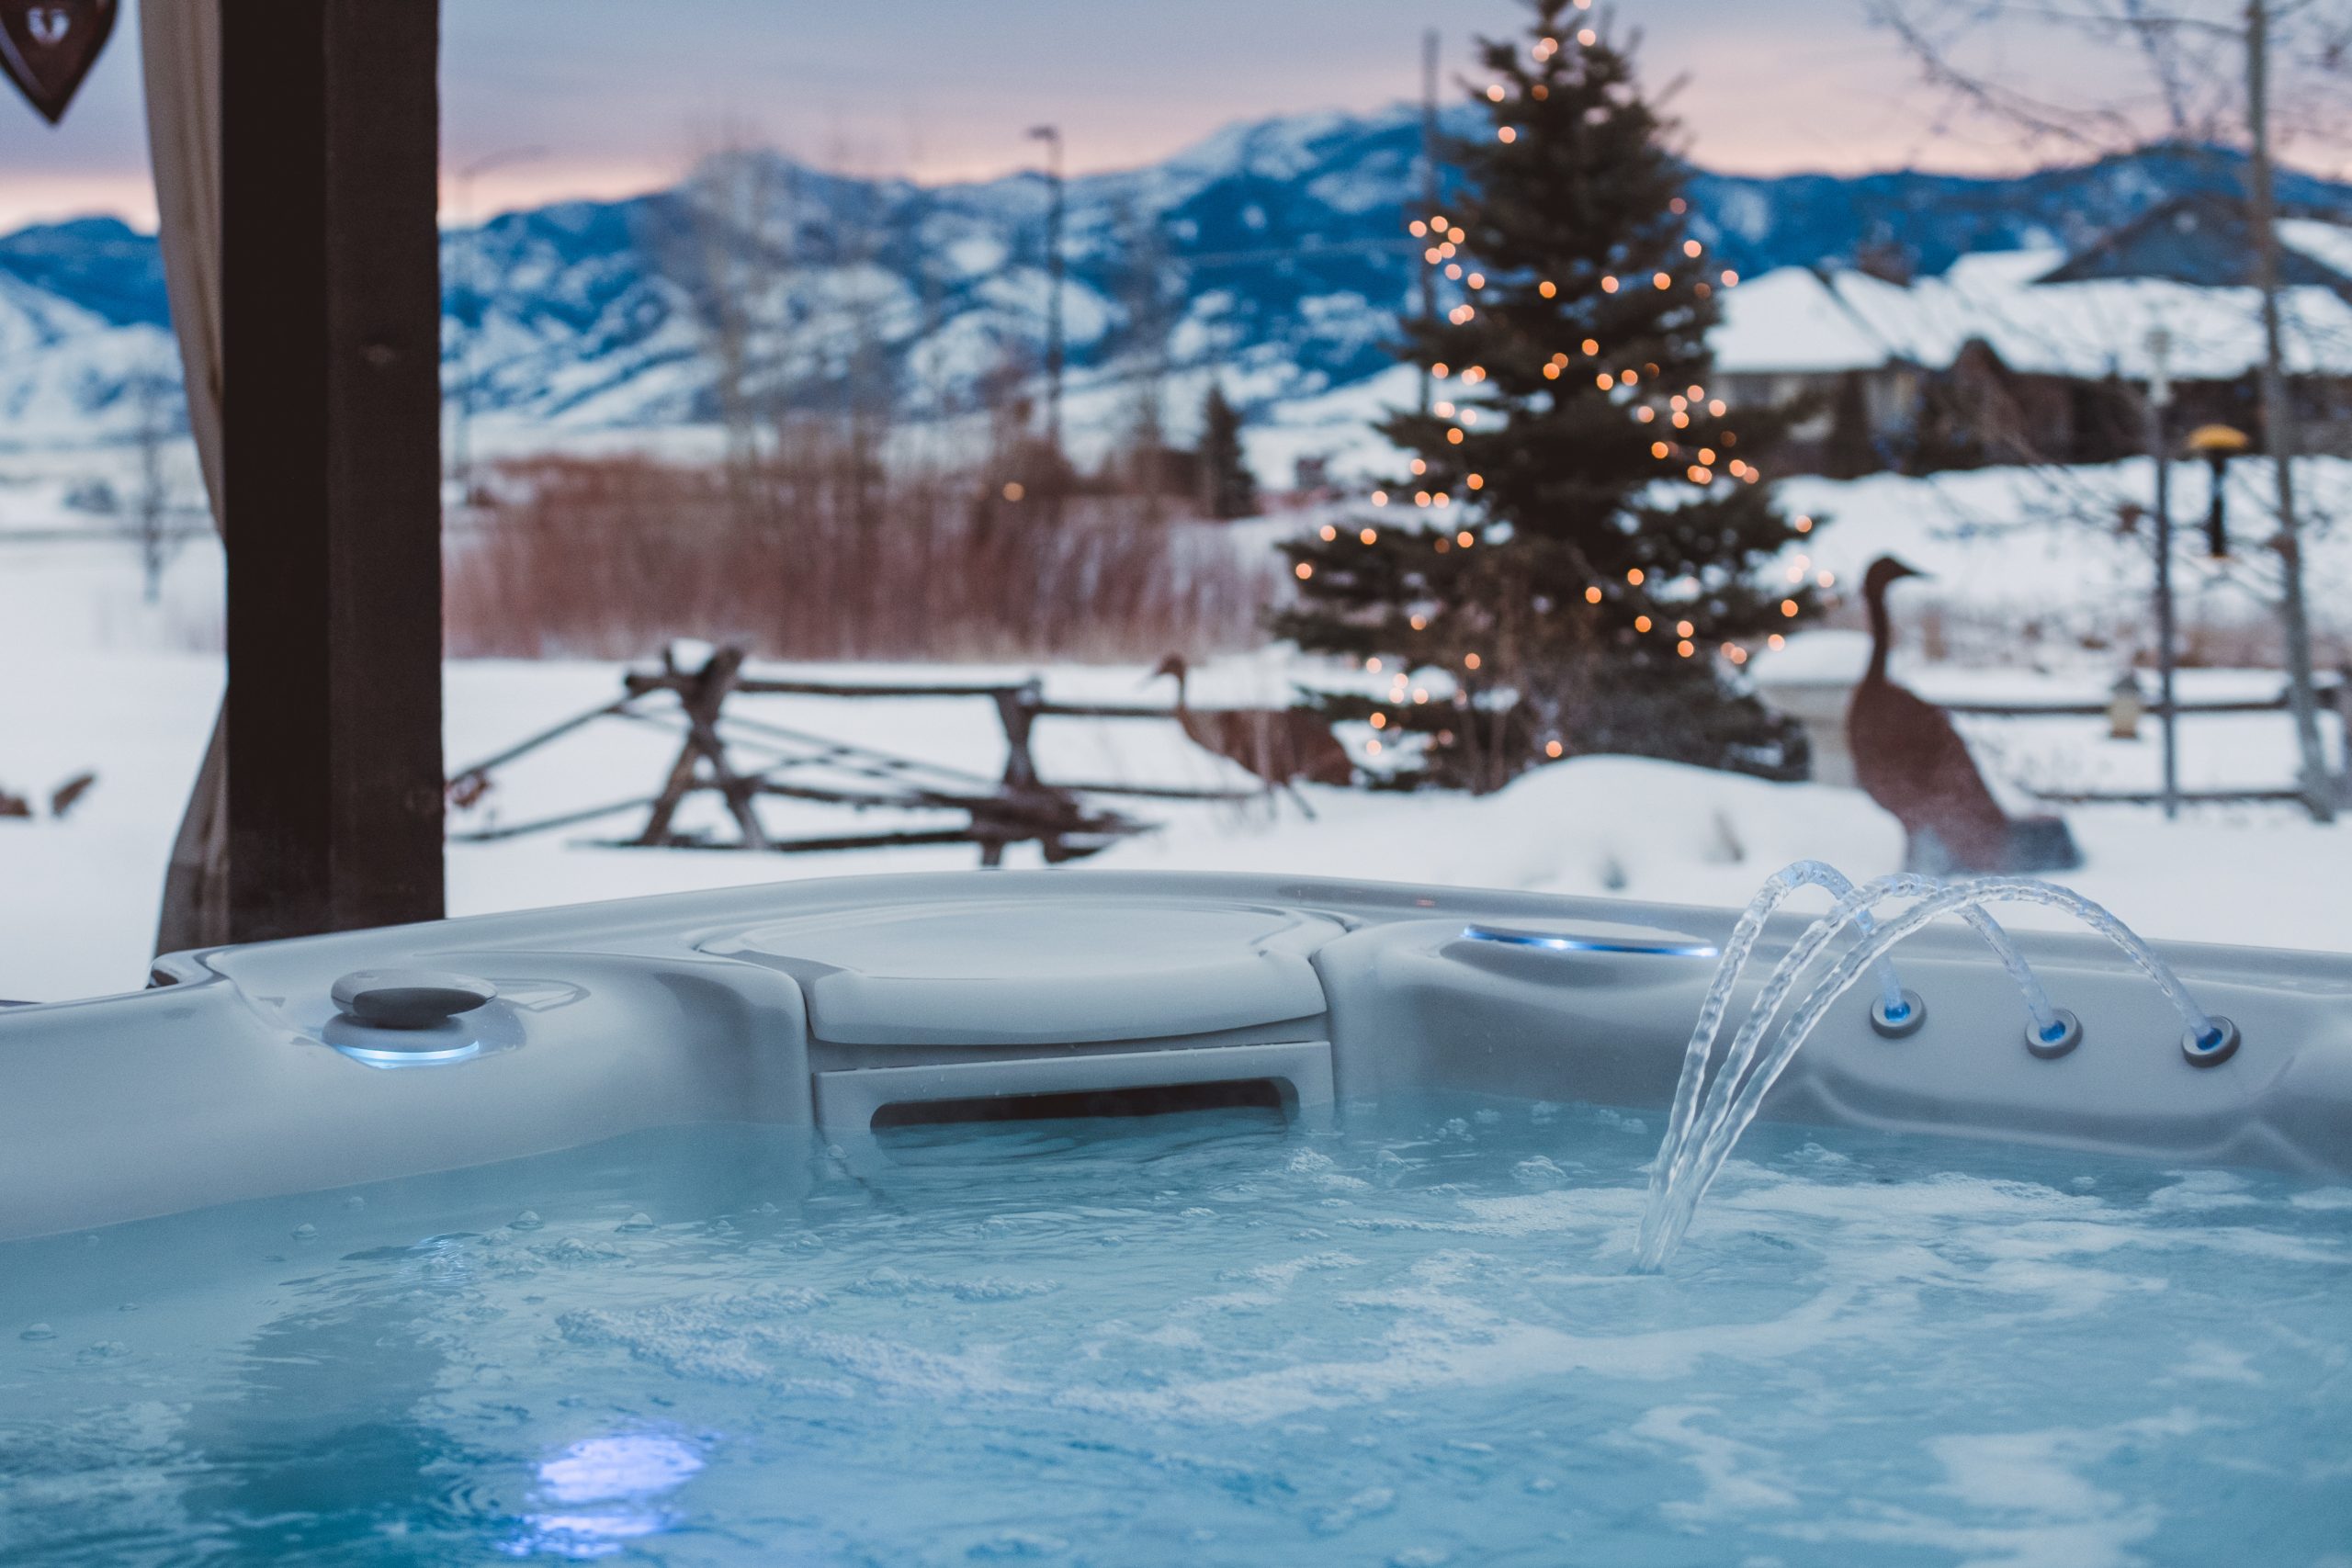 Have a Cozy, Merry Christmas With a New Hot Tub